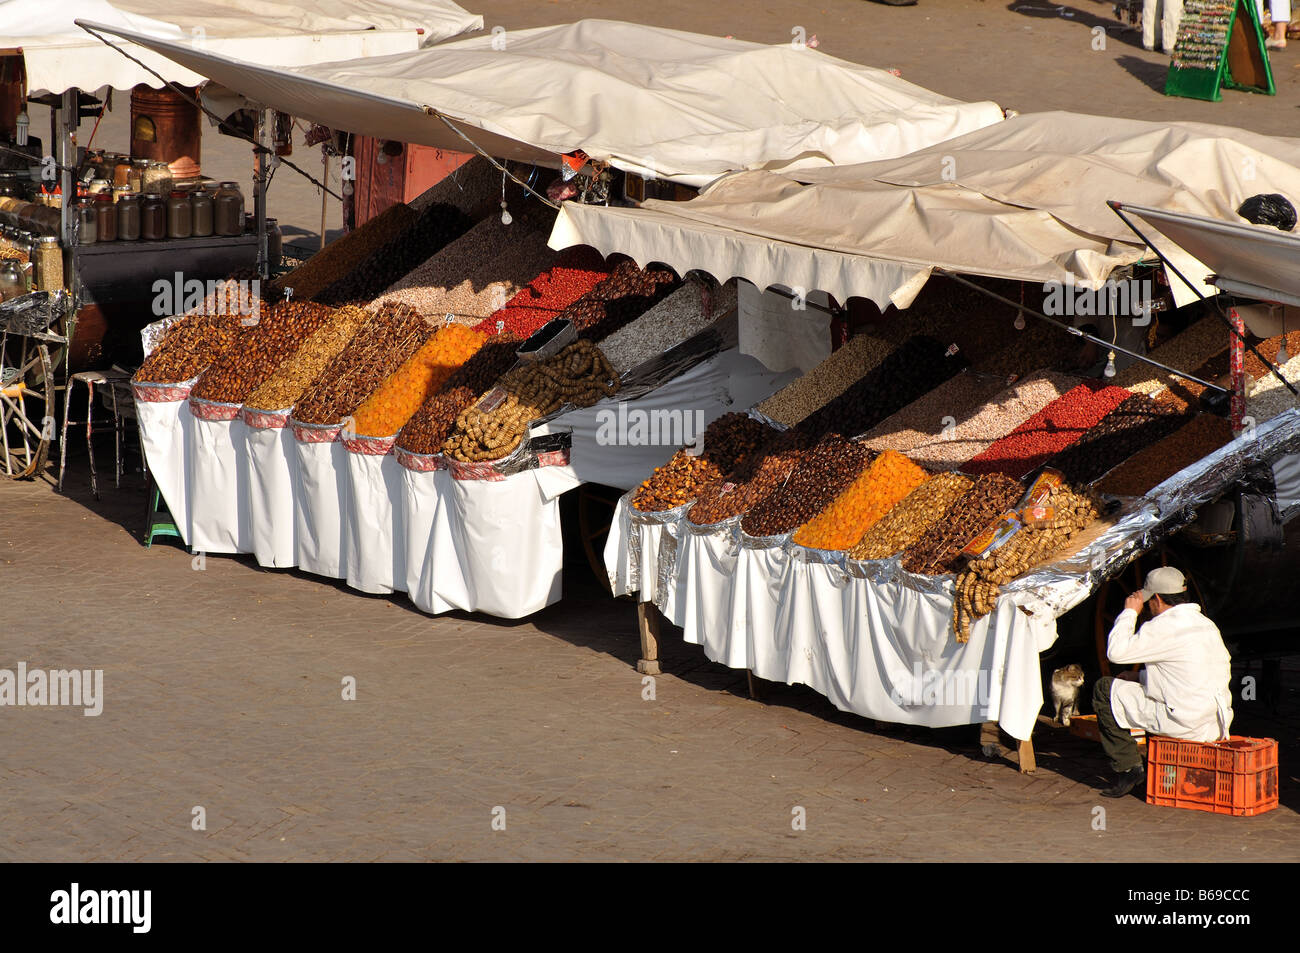 Market stall at Djemaa el Fna place in Marrakech, Morocco Stock Photo